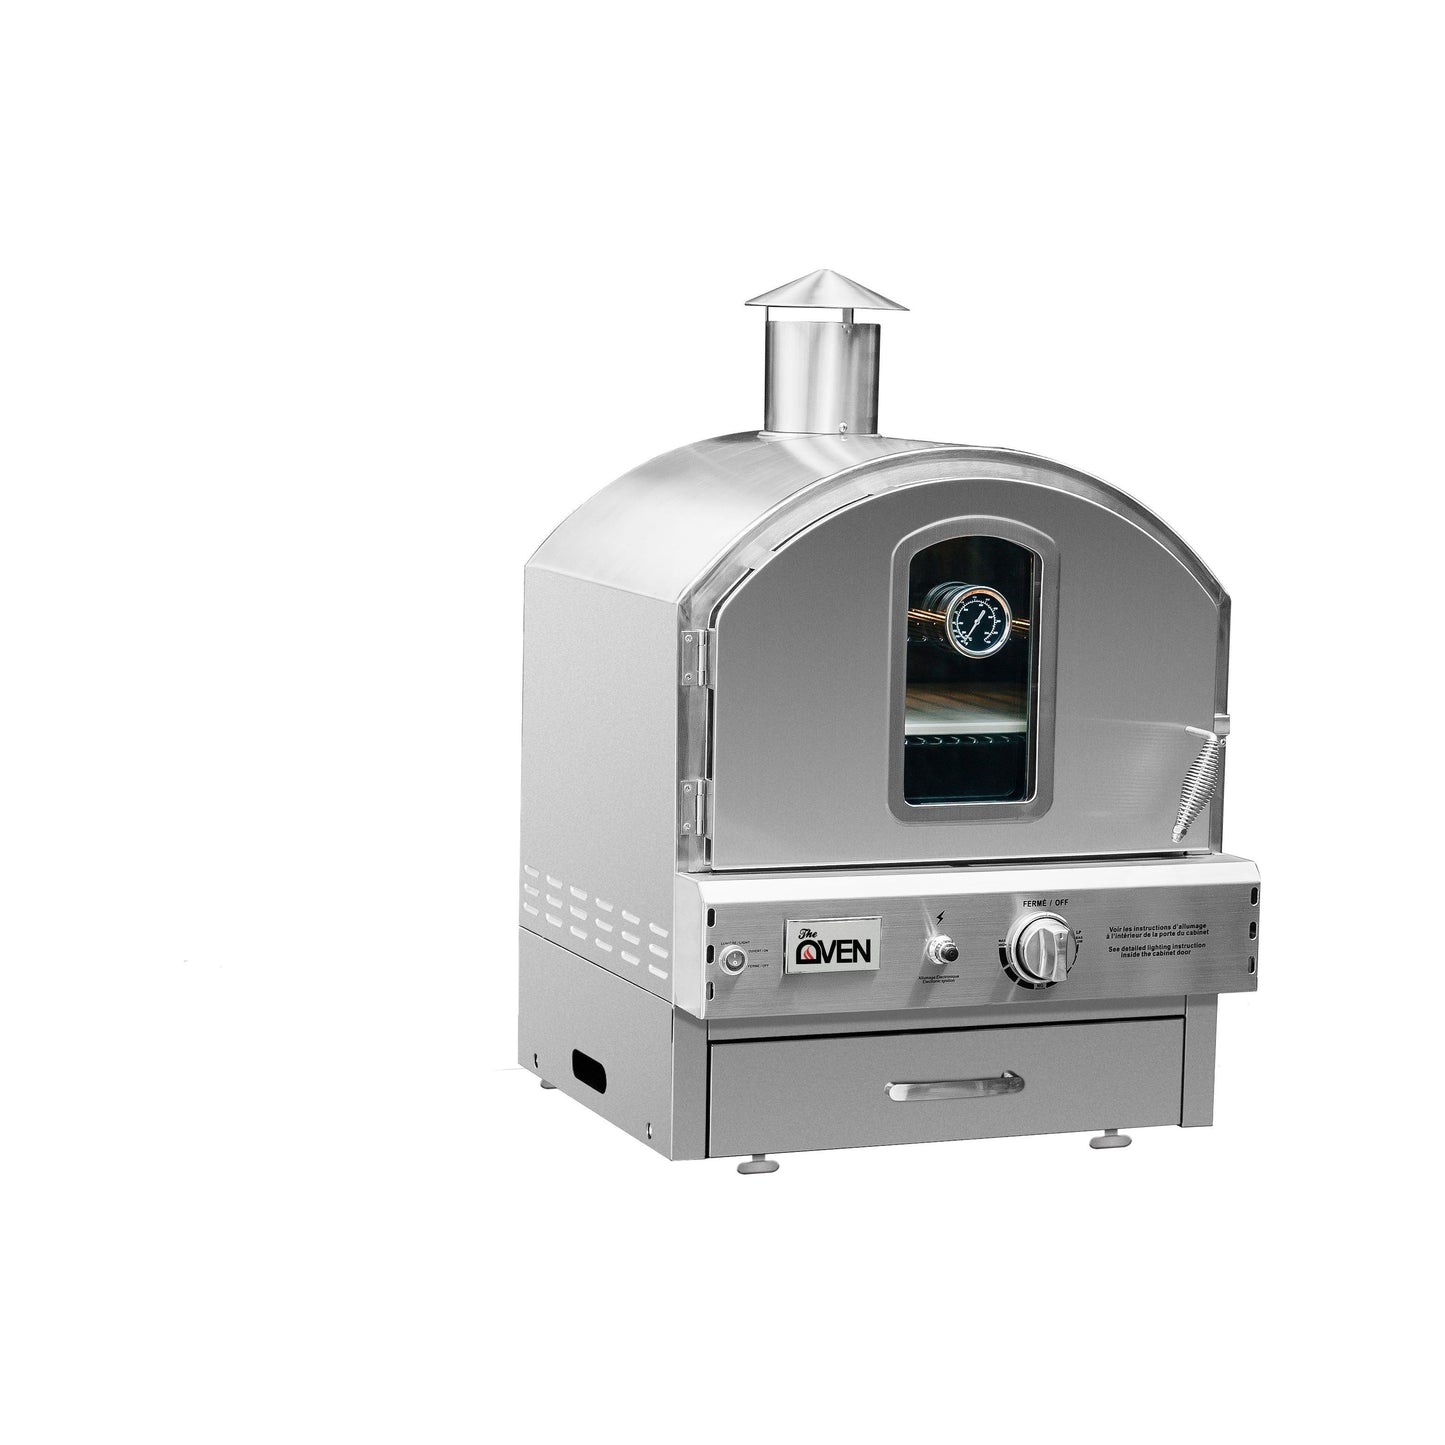 Pizza Makers & Ovens - Summerset Stainless Steel Built-In / Countertop Natural Gas Fired Outdoor Pizza Oven - SS-OVBI-NG